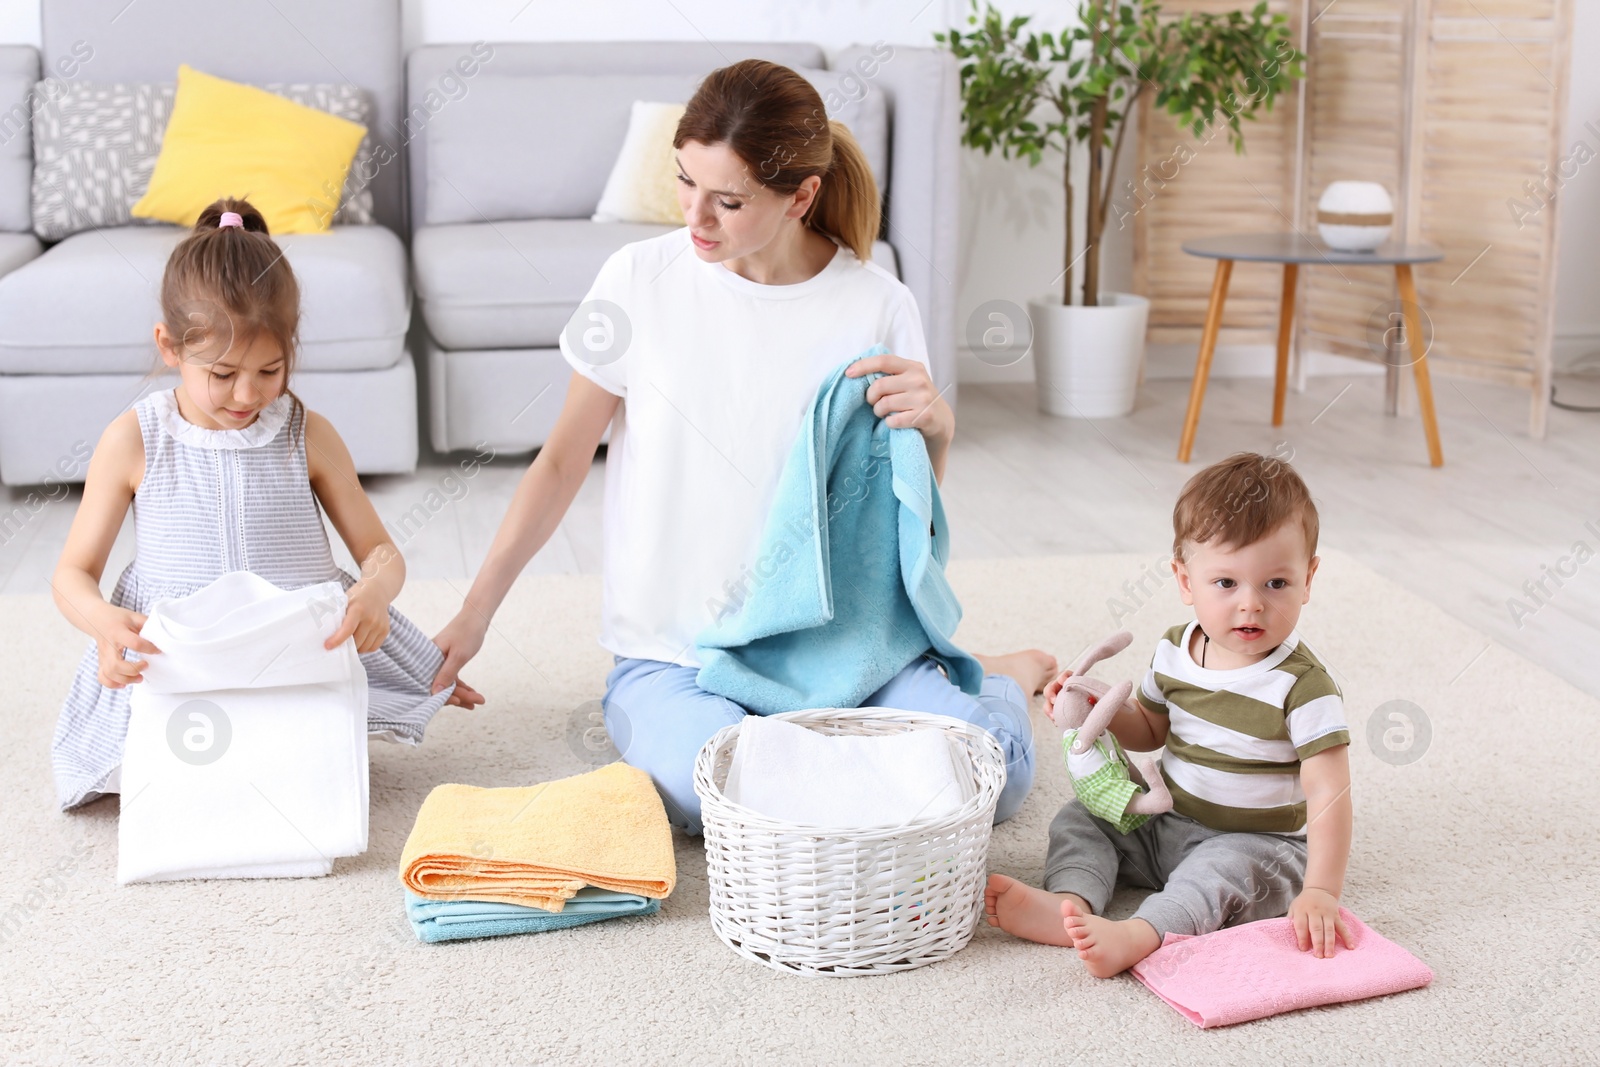 Photo of Housewife with children folding freshly washed towels in room